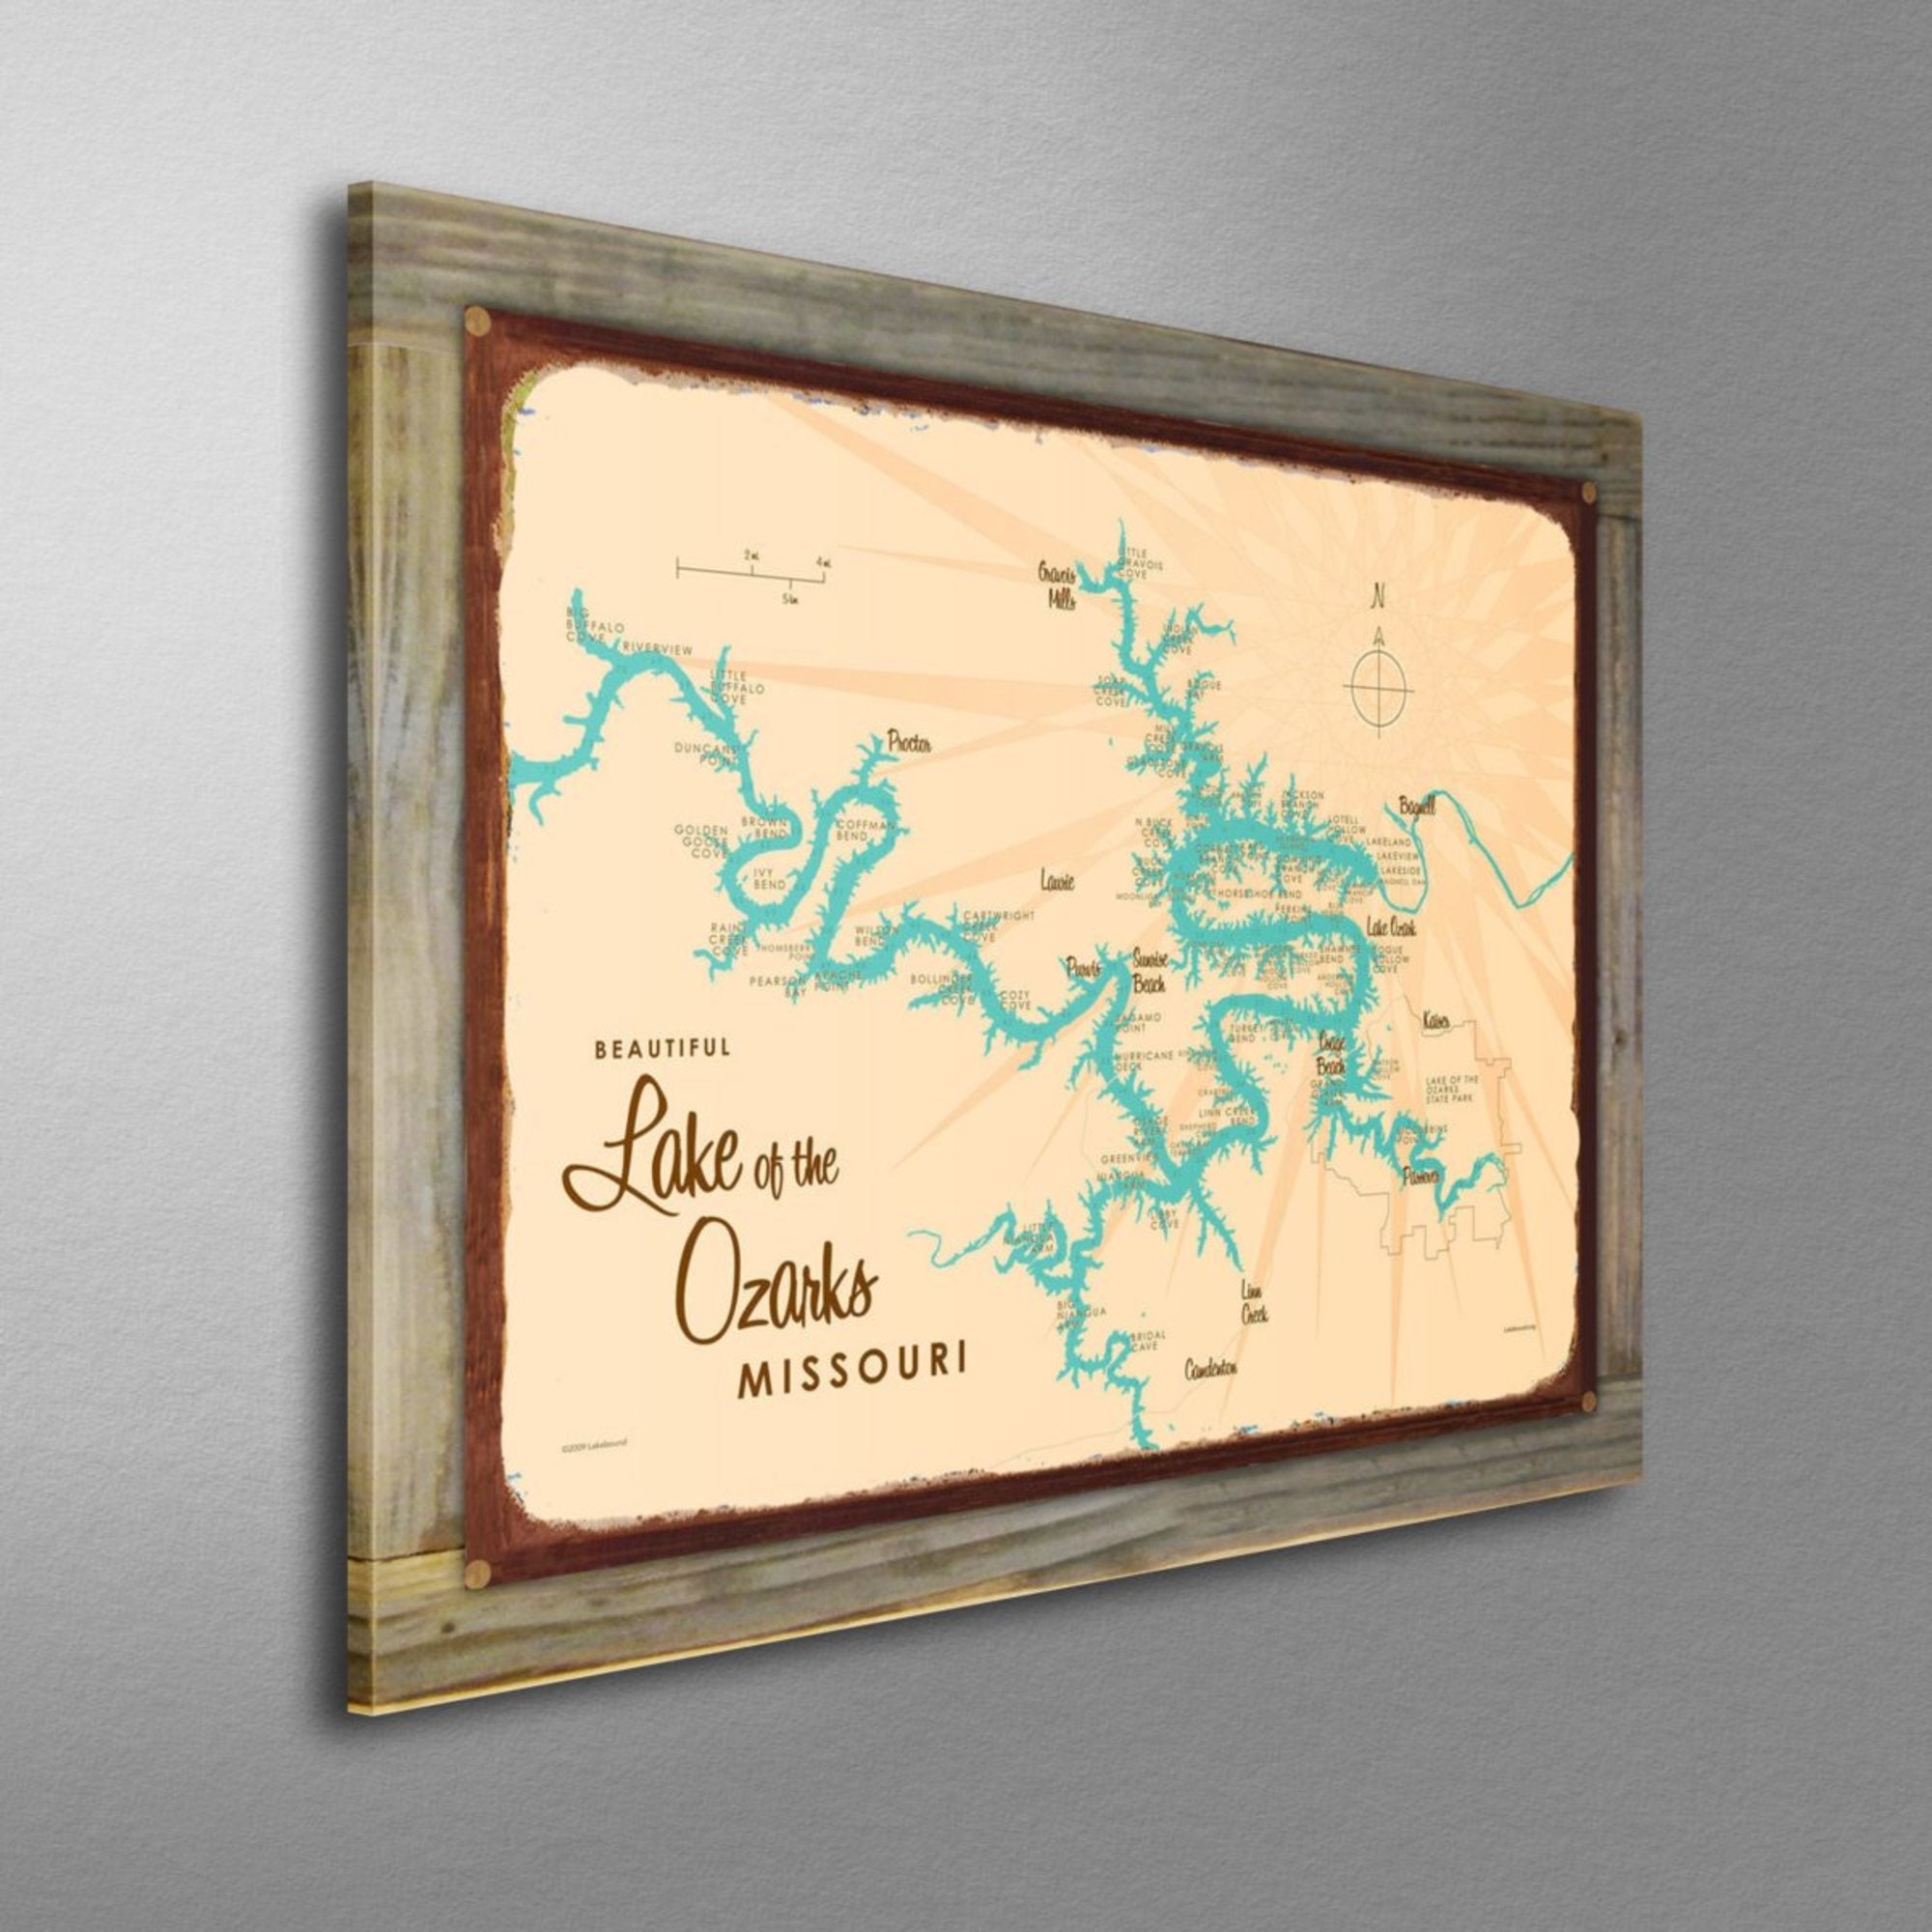 Lake of the Ozarks Missouri (with Mile Markers), Wood-Mounted Rustic Metal Sign Map Art